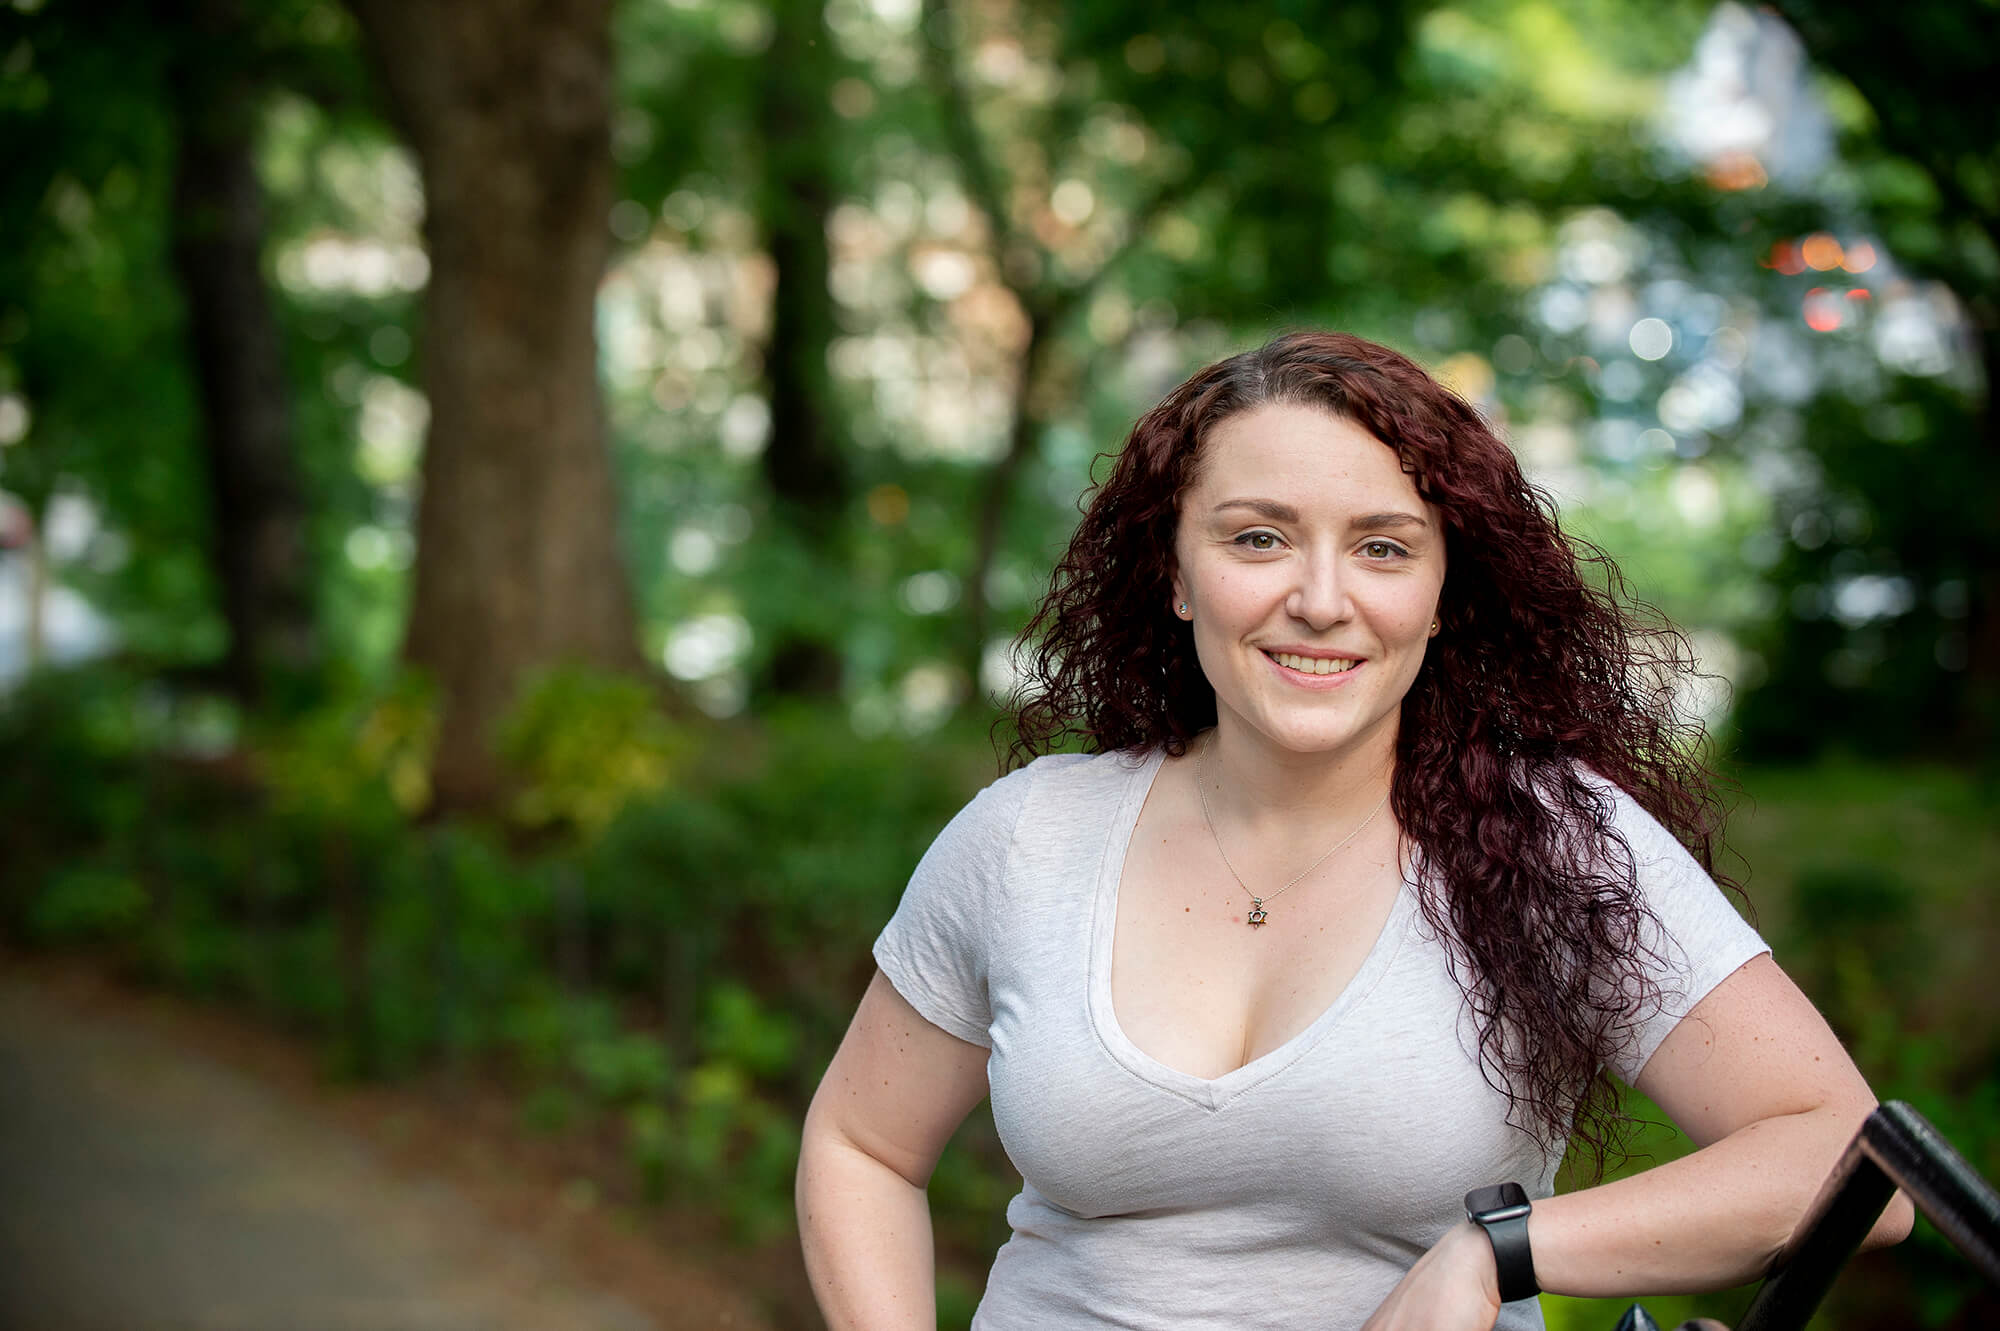 A woman wears a white t-shirt and smiles. Trees are blurred in the background.